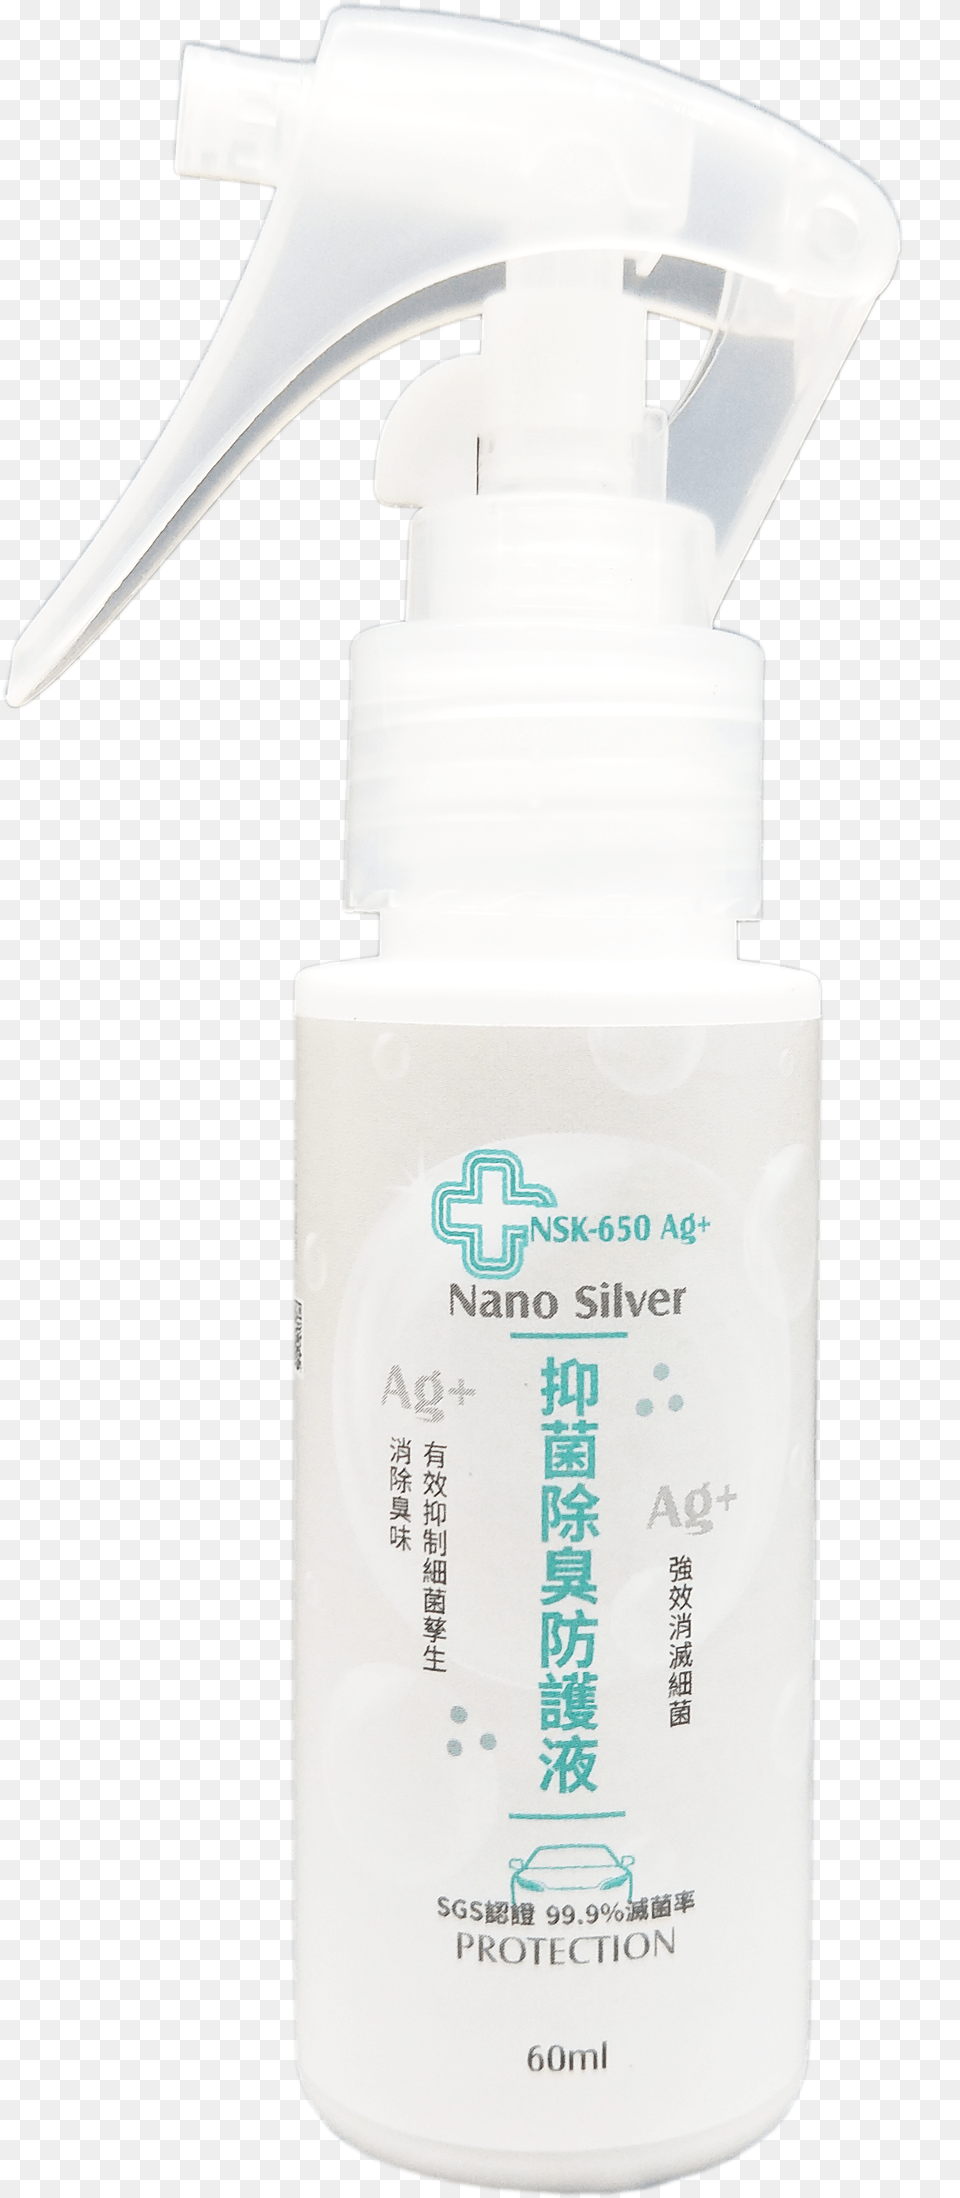 Antibacterial Water Spray Deca Angstrom Biotech Co Ltd Plastic Bottle, Lotion, Tin, Shaker Free Png Download